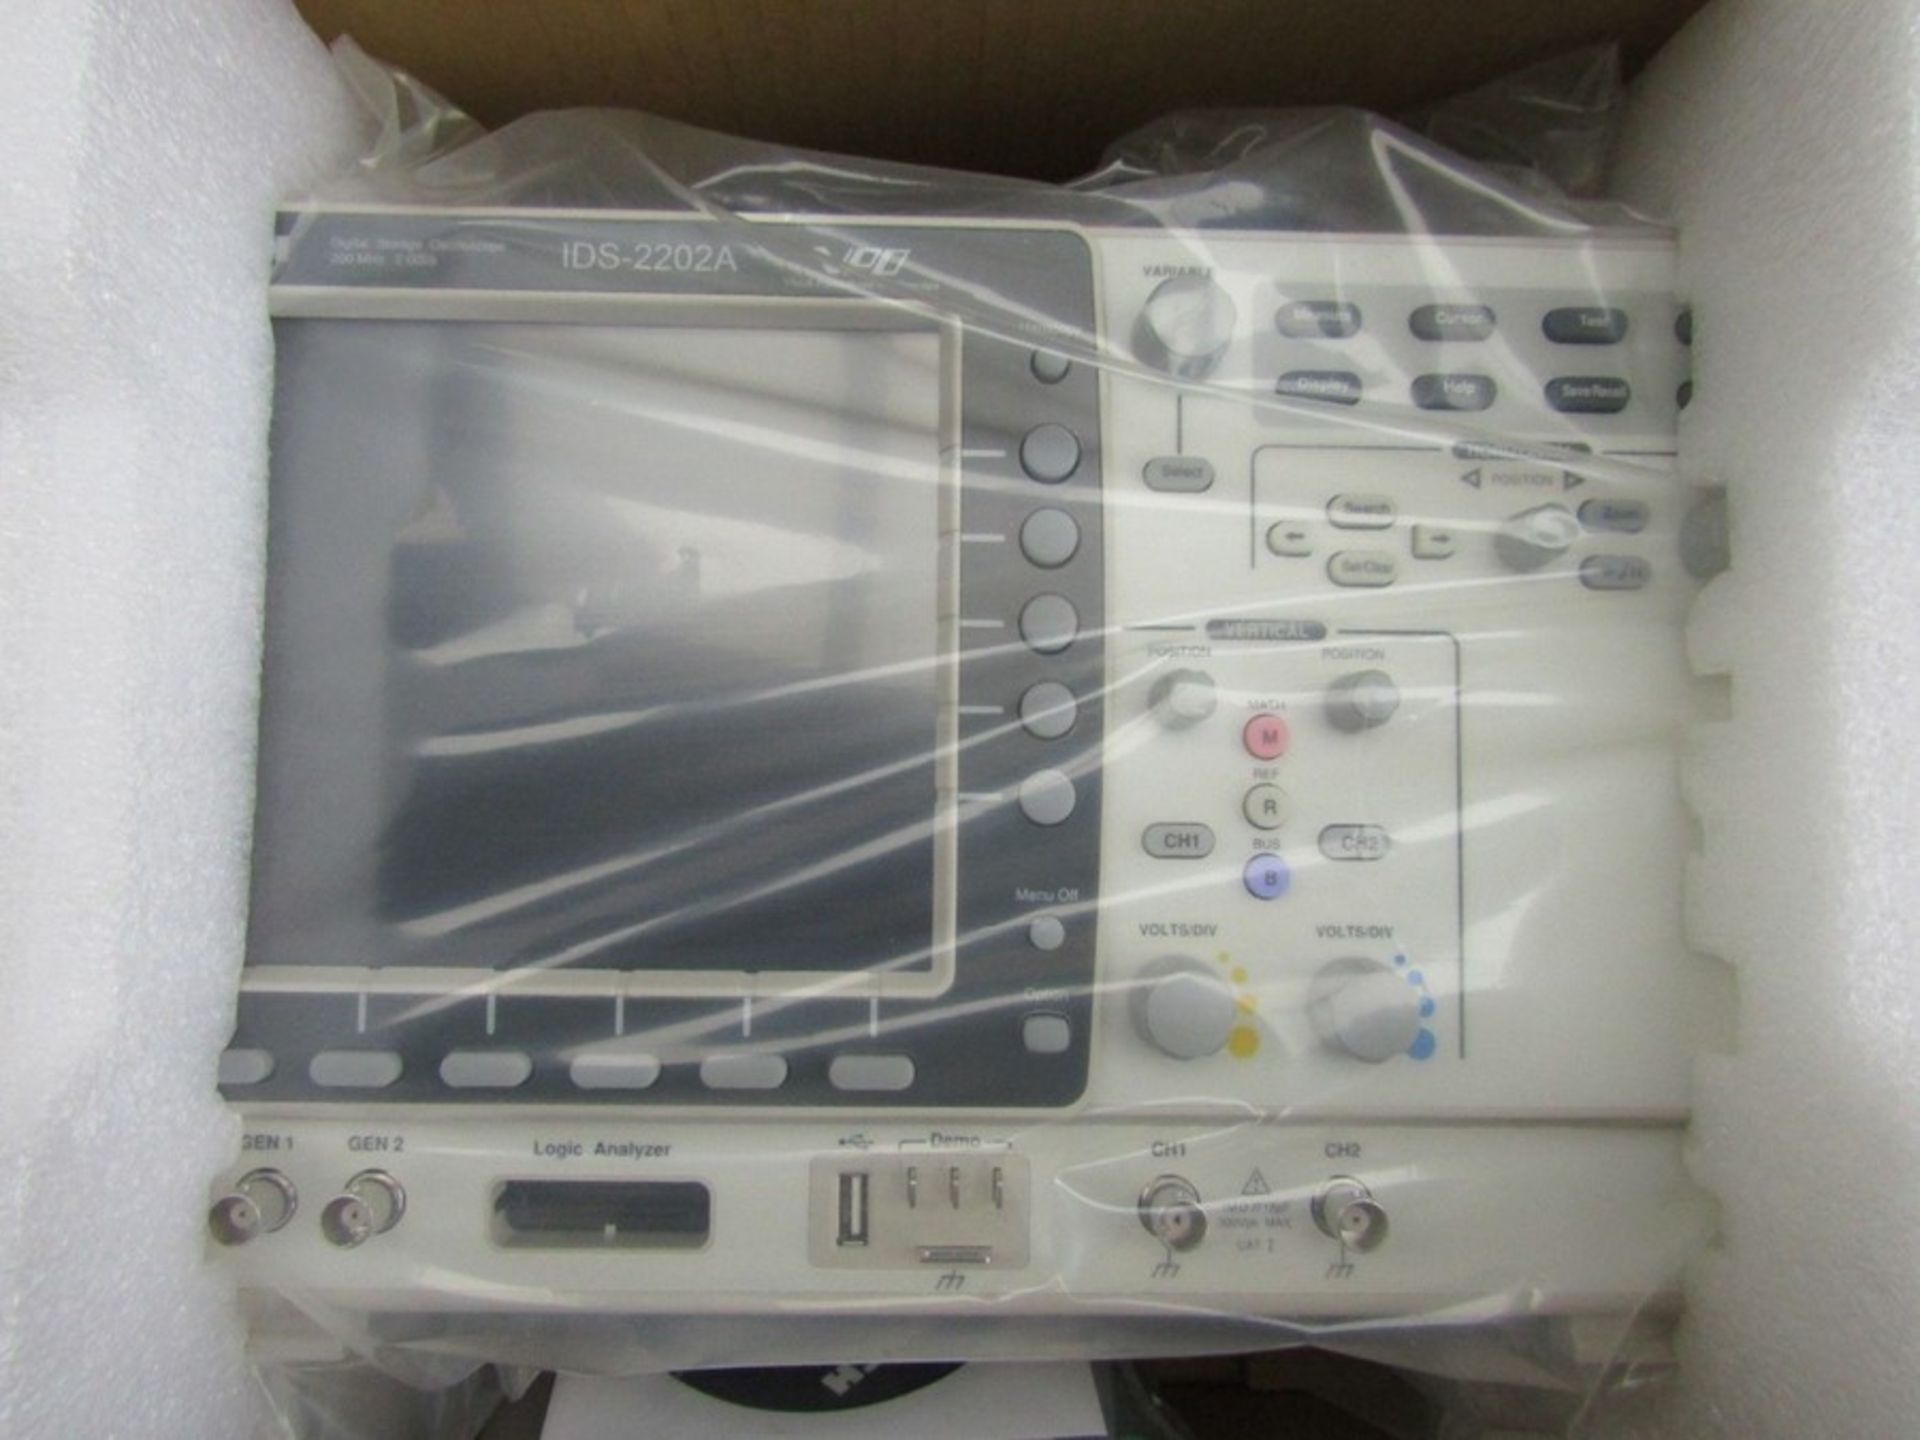 IDS-2202A Digital Oscilloscope, Digital Storage, 2 Channels, 200MHz, ISO-TECH IDS2000A Series - Image 2 of 4